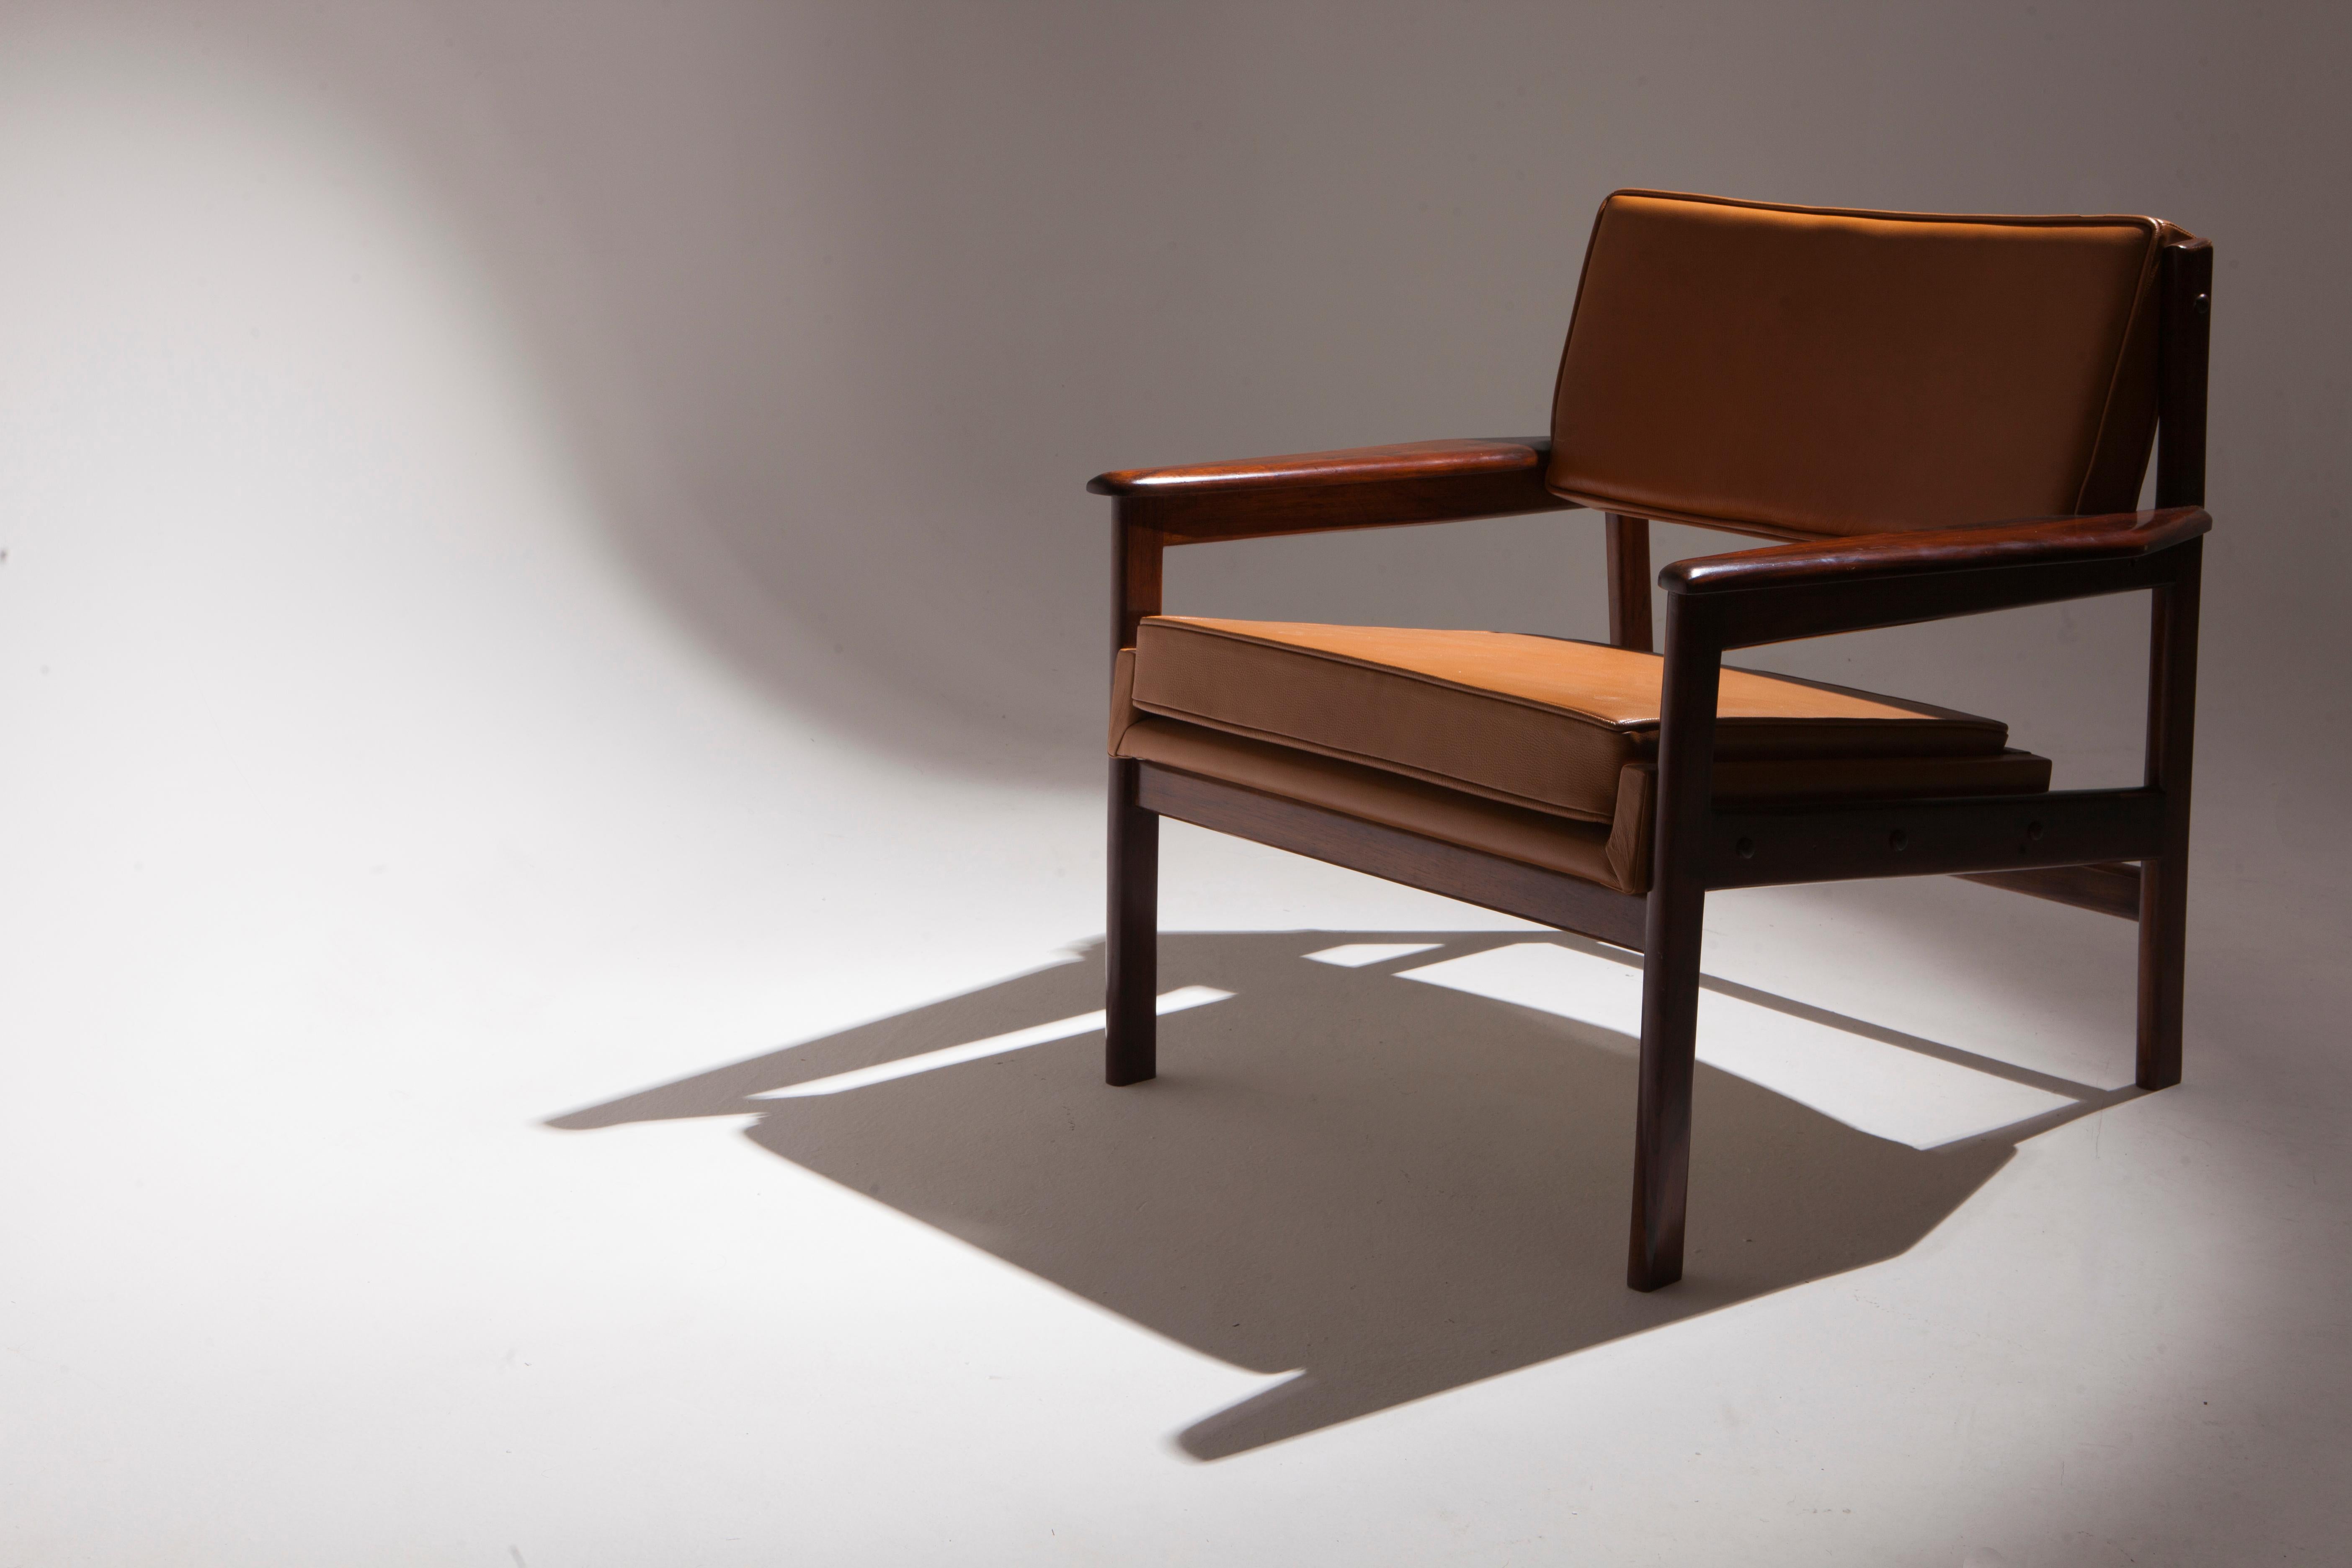 Leather Set of 2 Mid-Century Modern Drummond Armchair by Sergio Rodrigues, Brazil 1950's